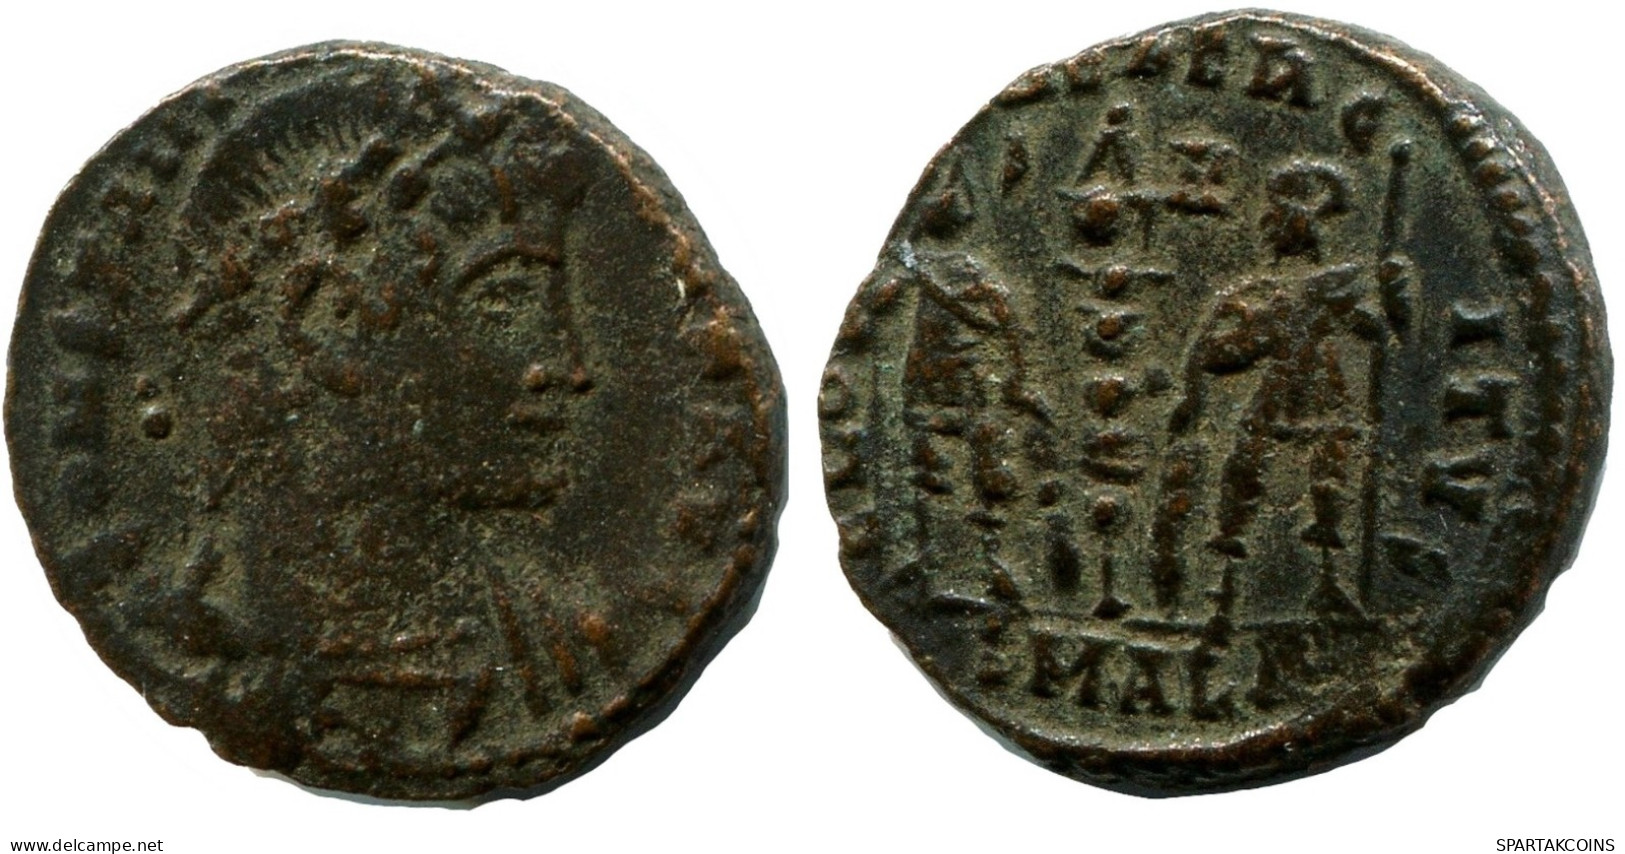 CONSTANS MINTED IN ALEKSANDRIA FROM THE ROYAL ONTARIO MUSEUM #ANC11319.14.U.A - Der Christlischen Kaiser (307 / 363)